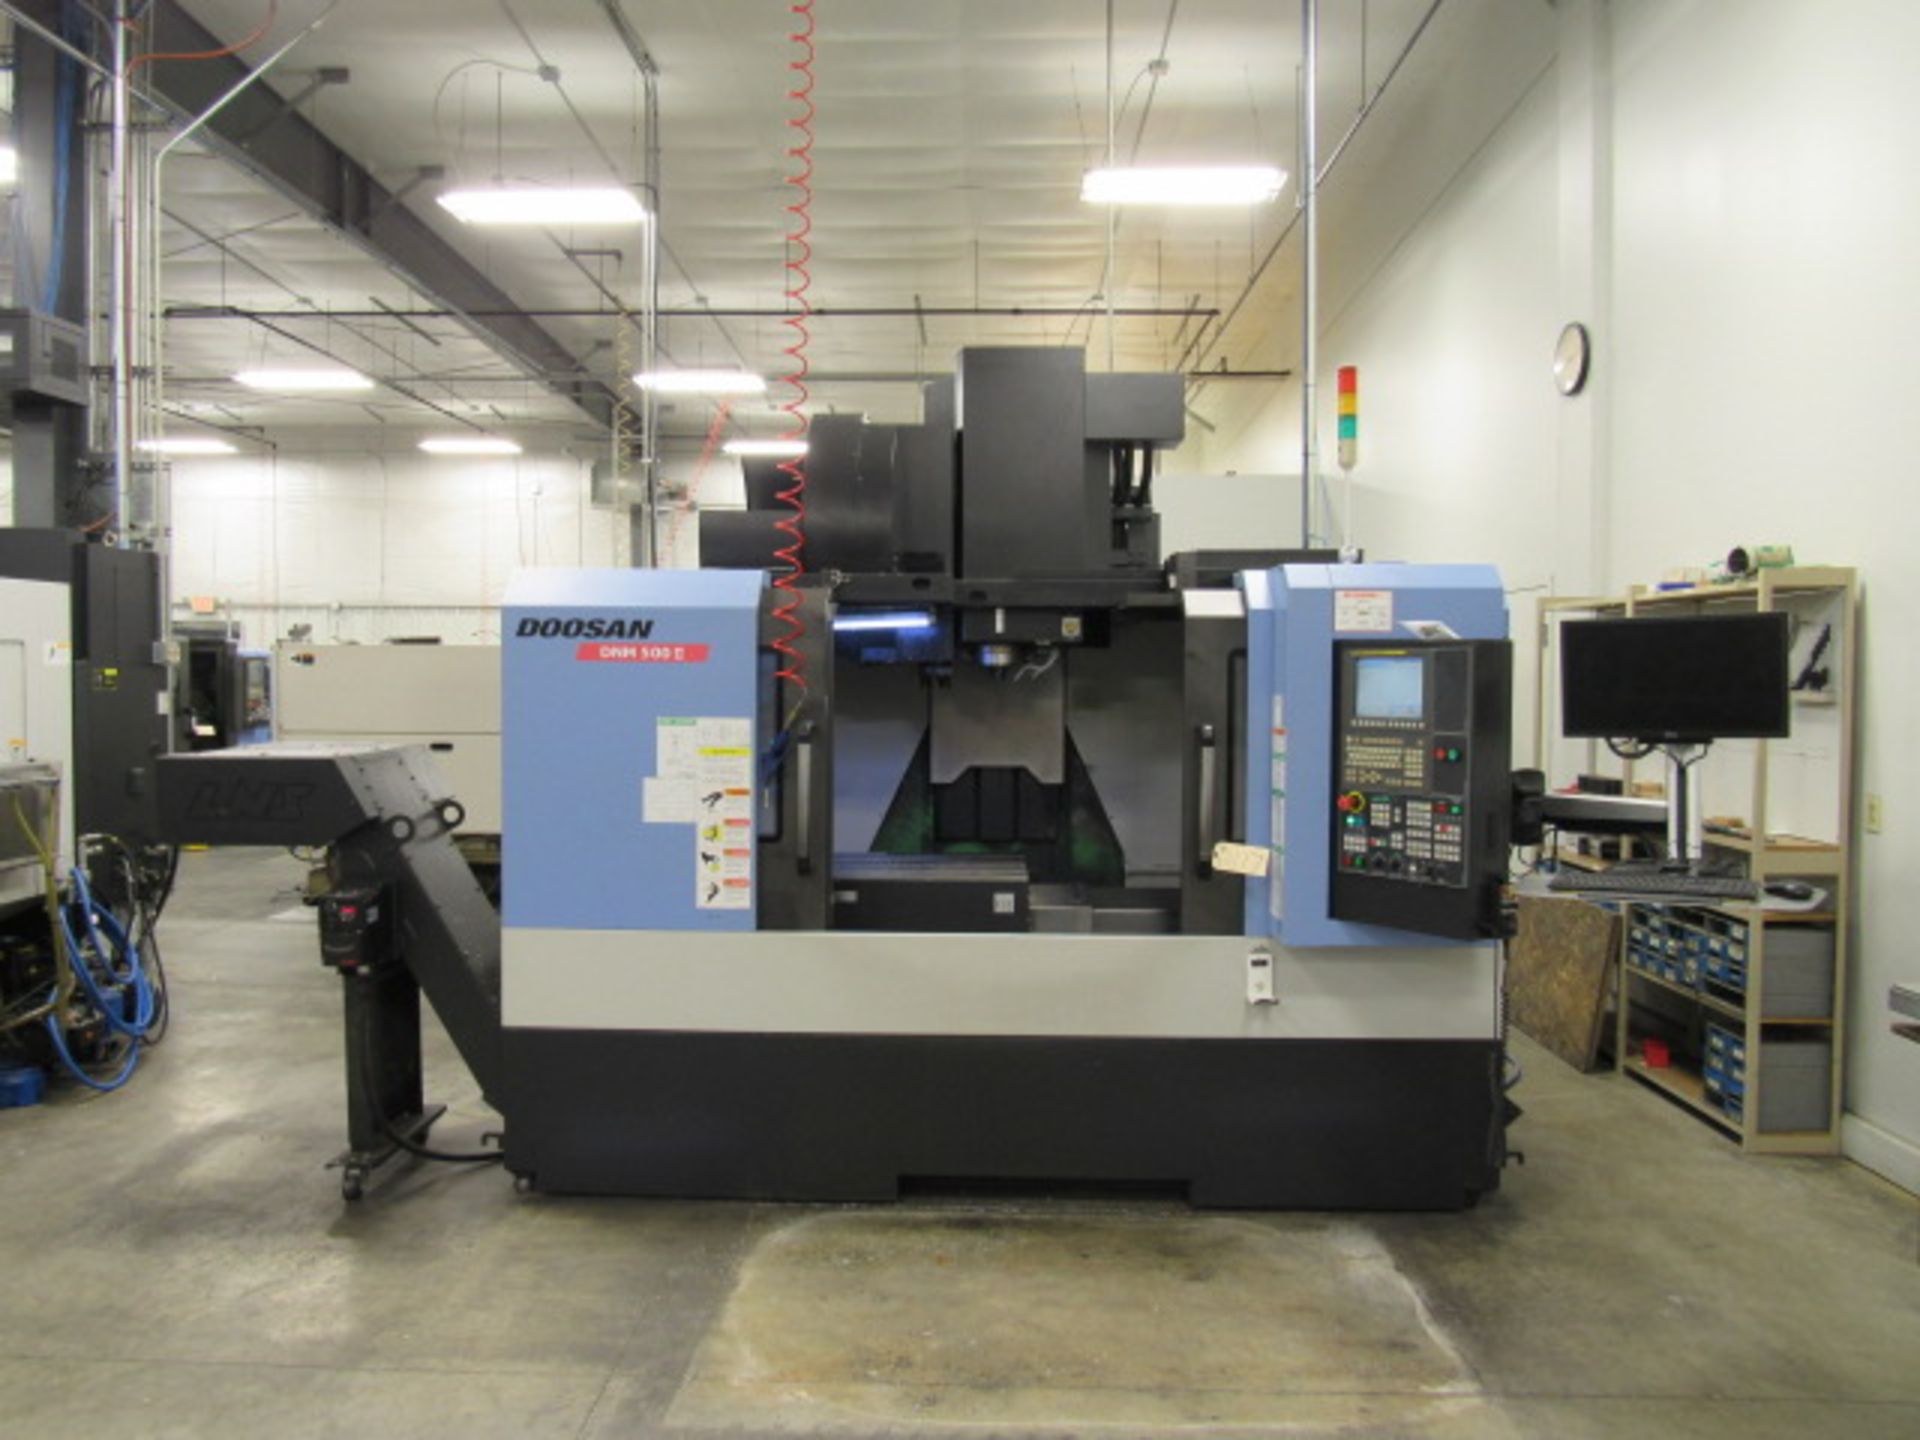 Doosan DNM 500 II CNC Vertical Machining Centers with 47.2'' x 21.2'' Tables, Big Plus #40, - Image 9 of 9